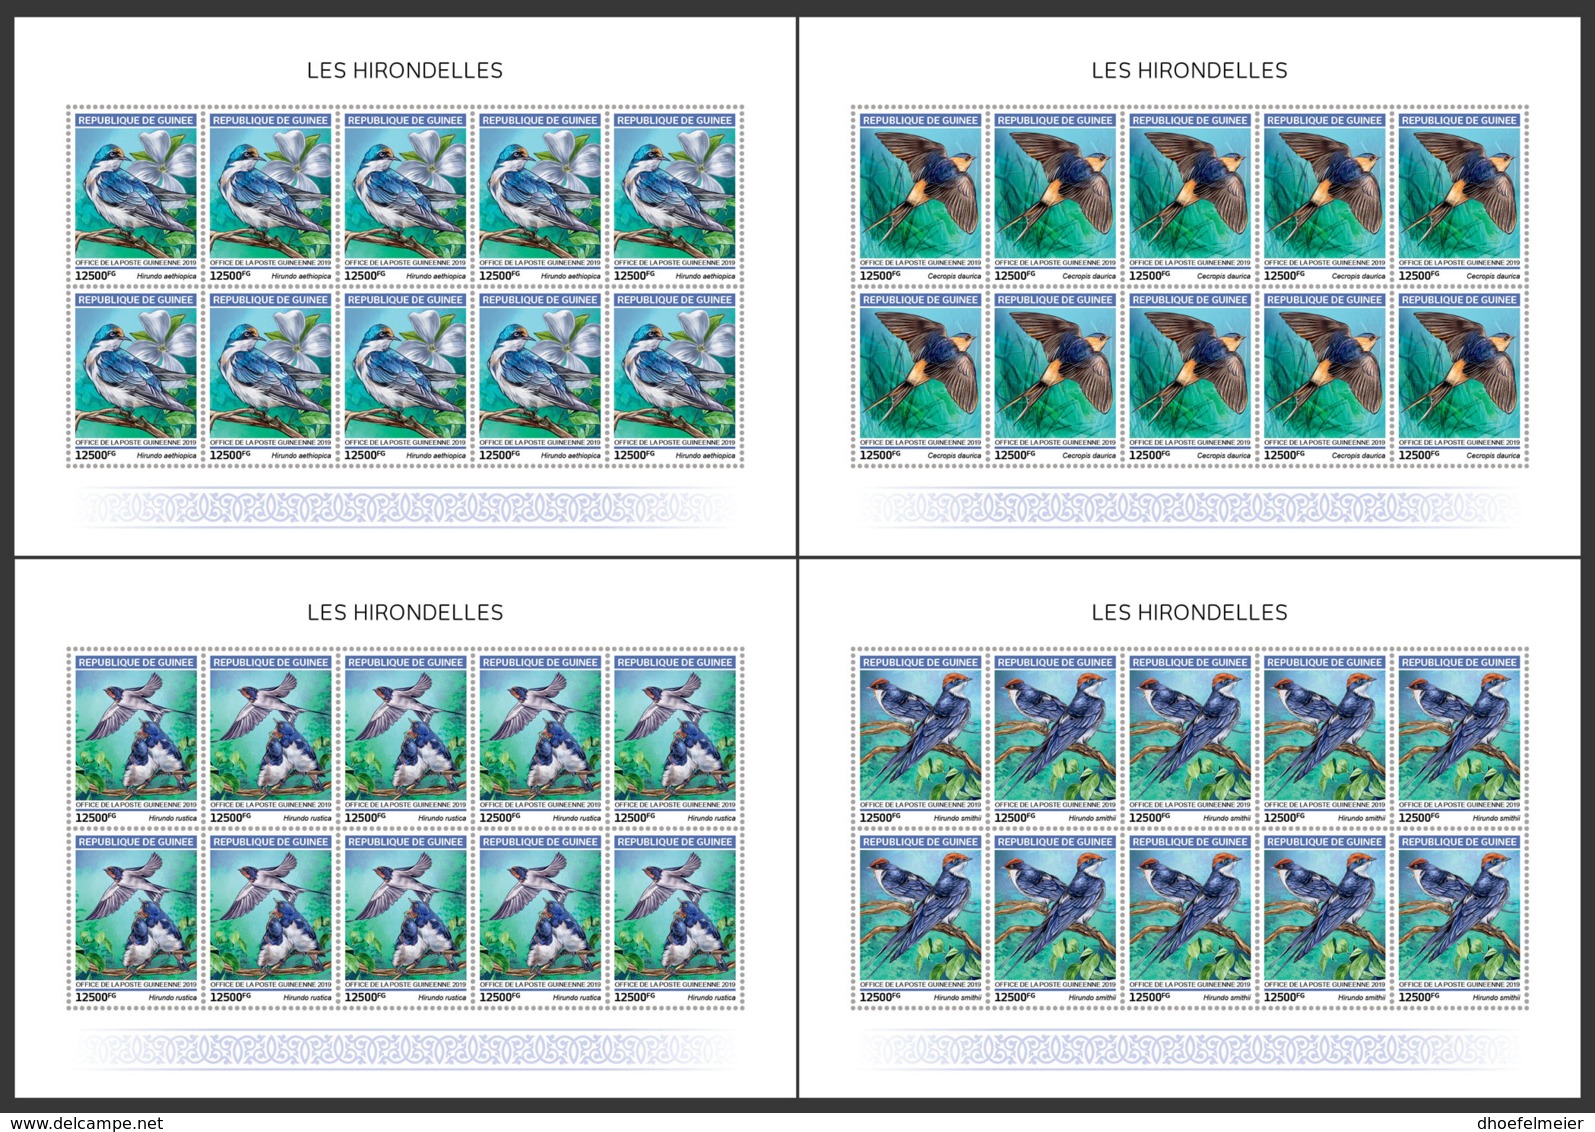 GUINEA REP. 2019 MNH Swallows Schwalben Hirondelles M/S - OFFICIAL ISSUE - DH1918 - Hirondelles